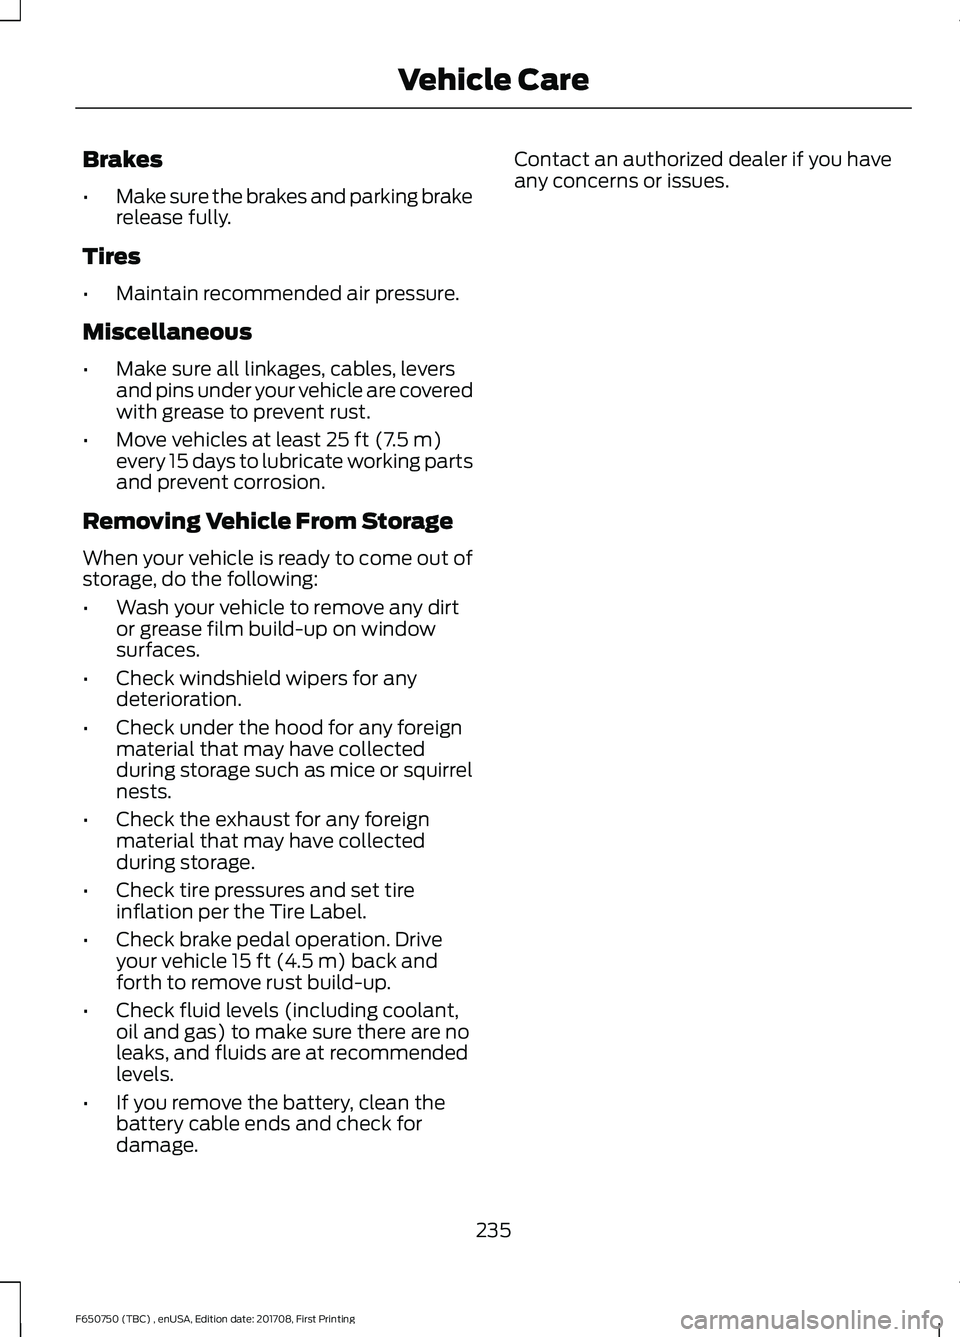 FORD F-650/750 2018  Owners Manual Brakes
•
Make sure the brakes and parking brake
release fully.
Tires
• Maintain recommended air pressure.
Miscellaneous
• Make sure all linkages, cables, levers
and pins under your vehicle are c